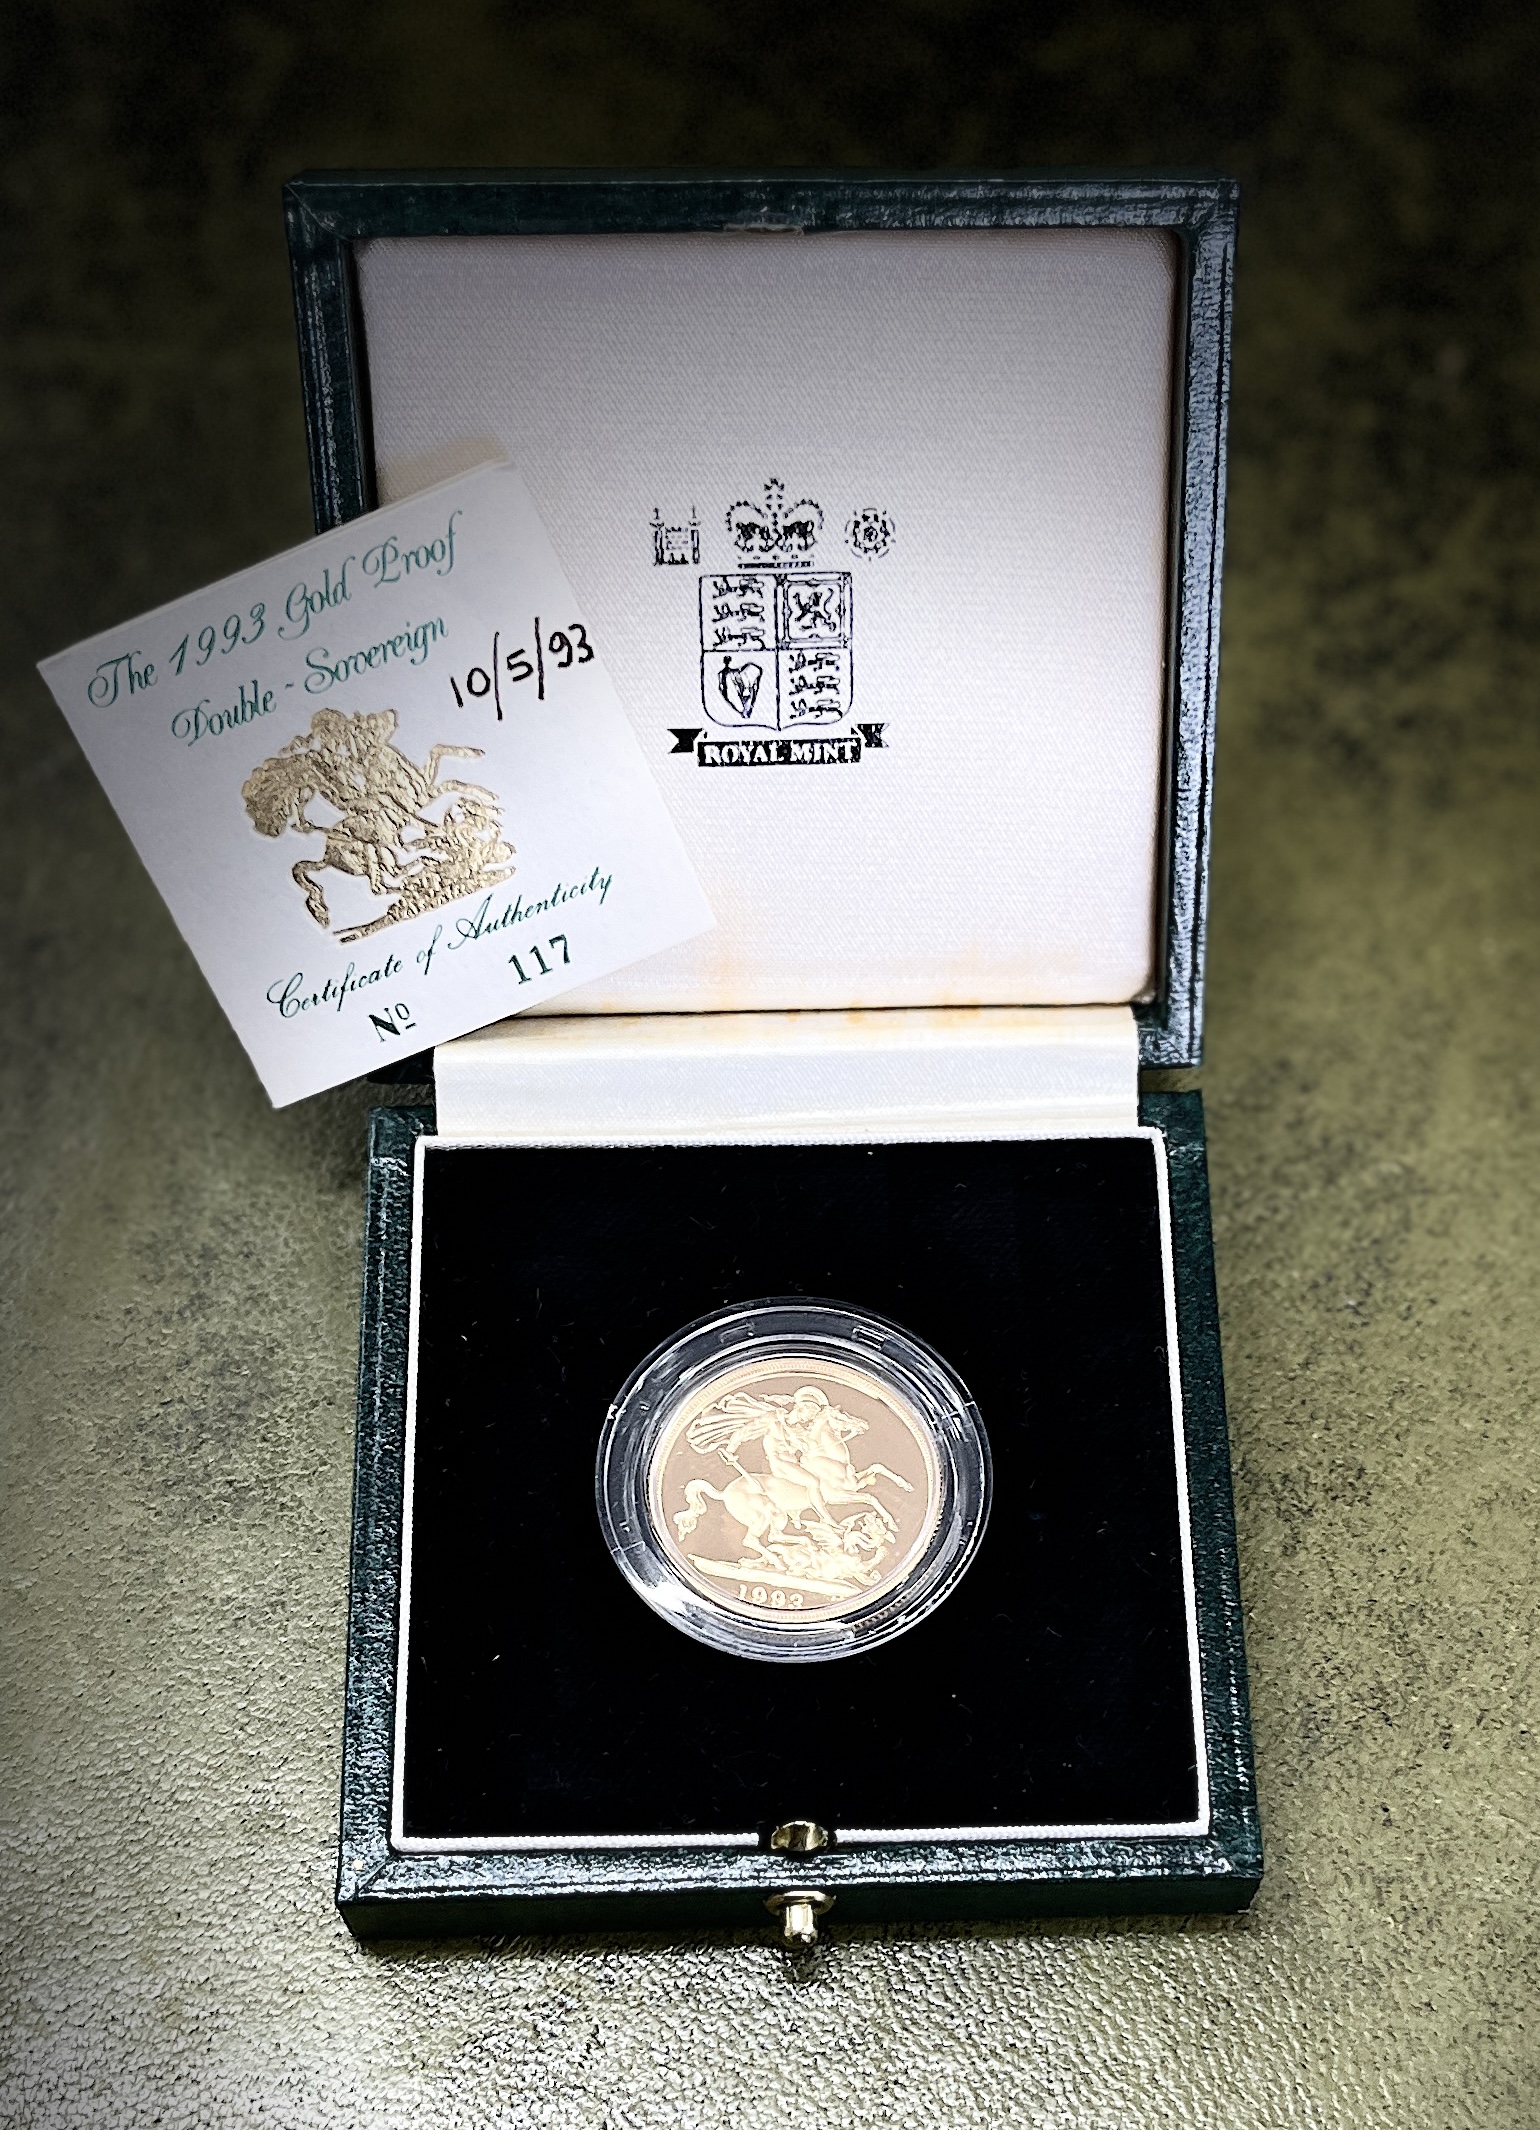 Royal Mint, a UK proof QEII double sovereign dated 1993 with certificate number 117, 15.98g, in - Image 3 of 4